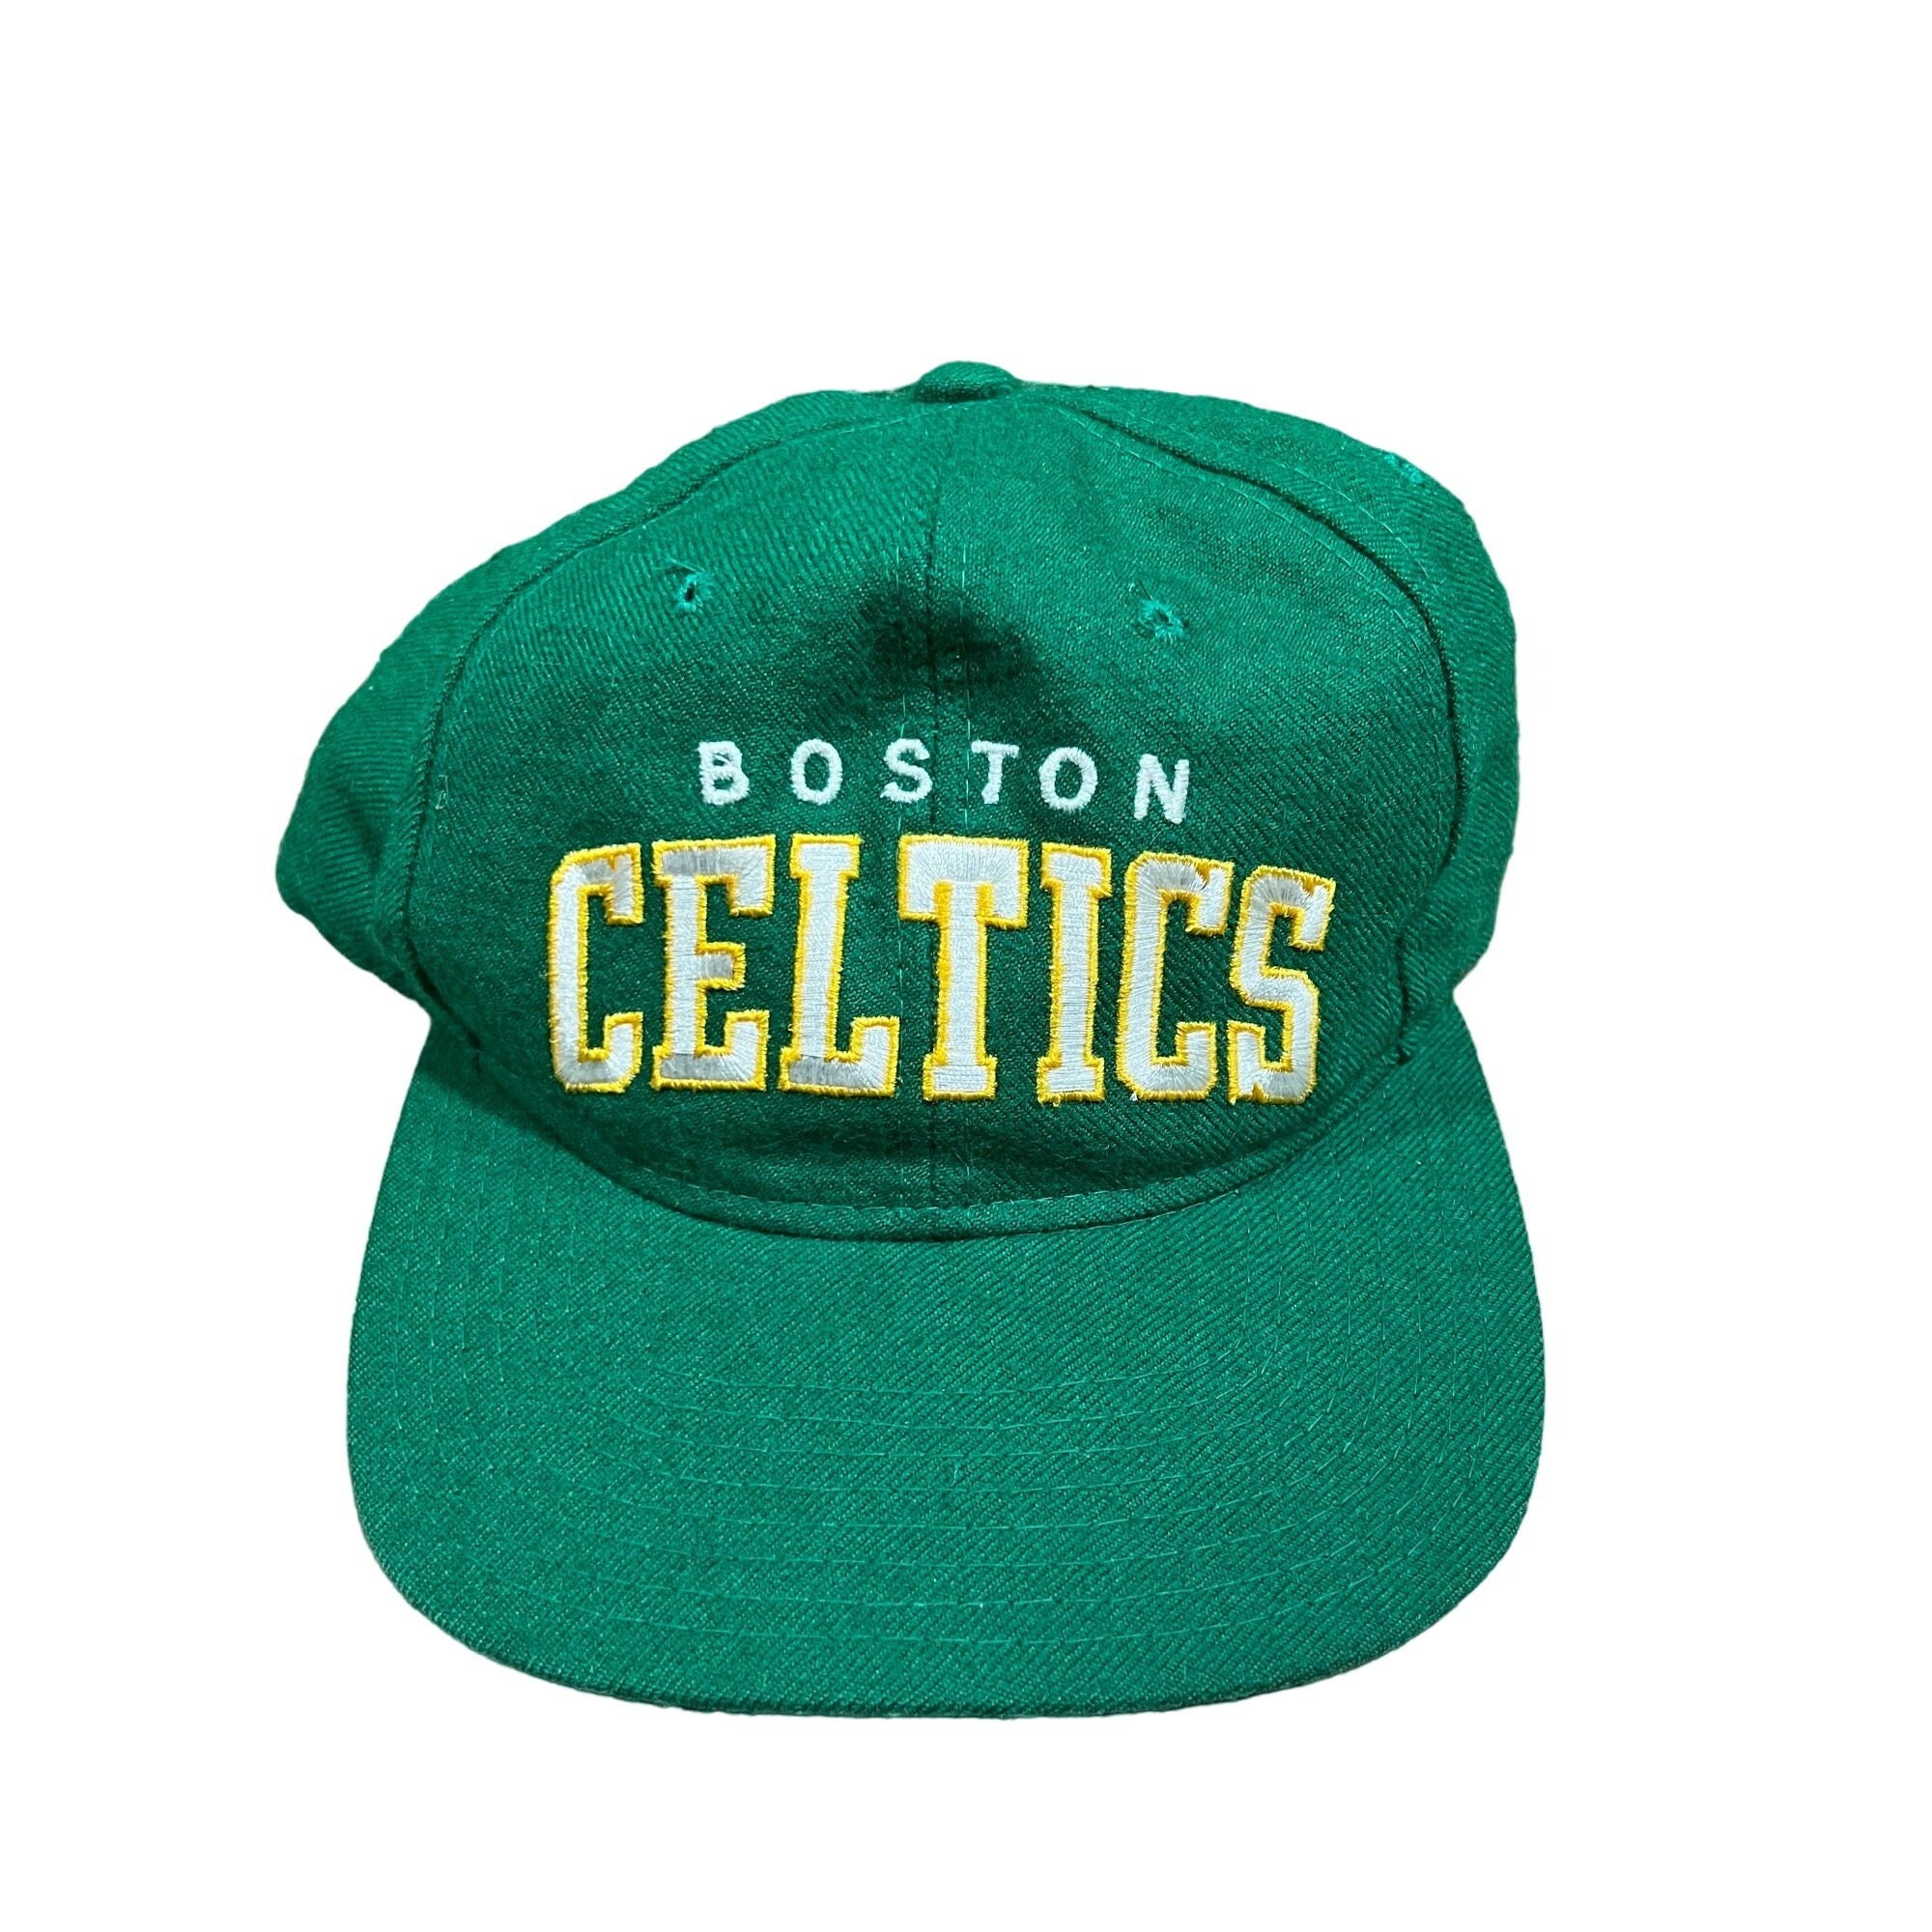 New Era Boston Celtics Fitted Hat NBA Official Team Black Faux Leather Cap